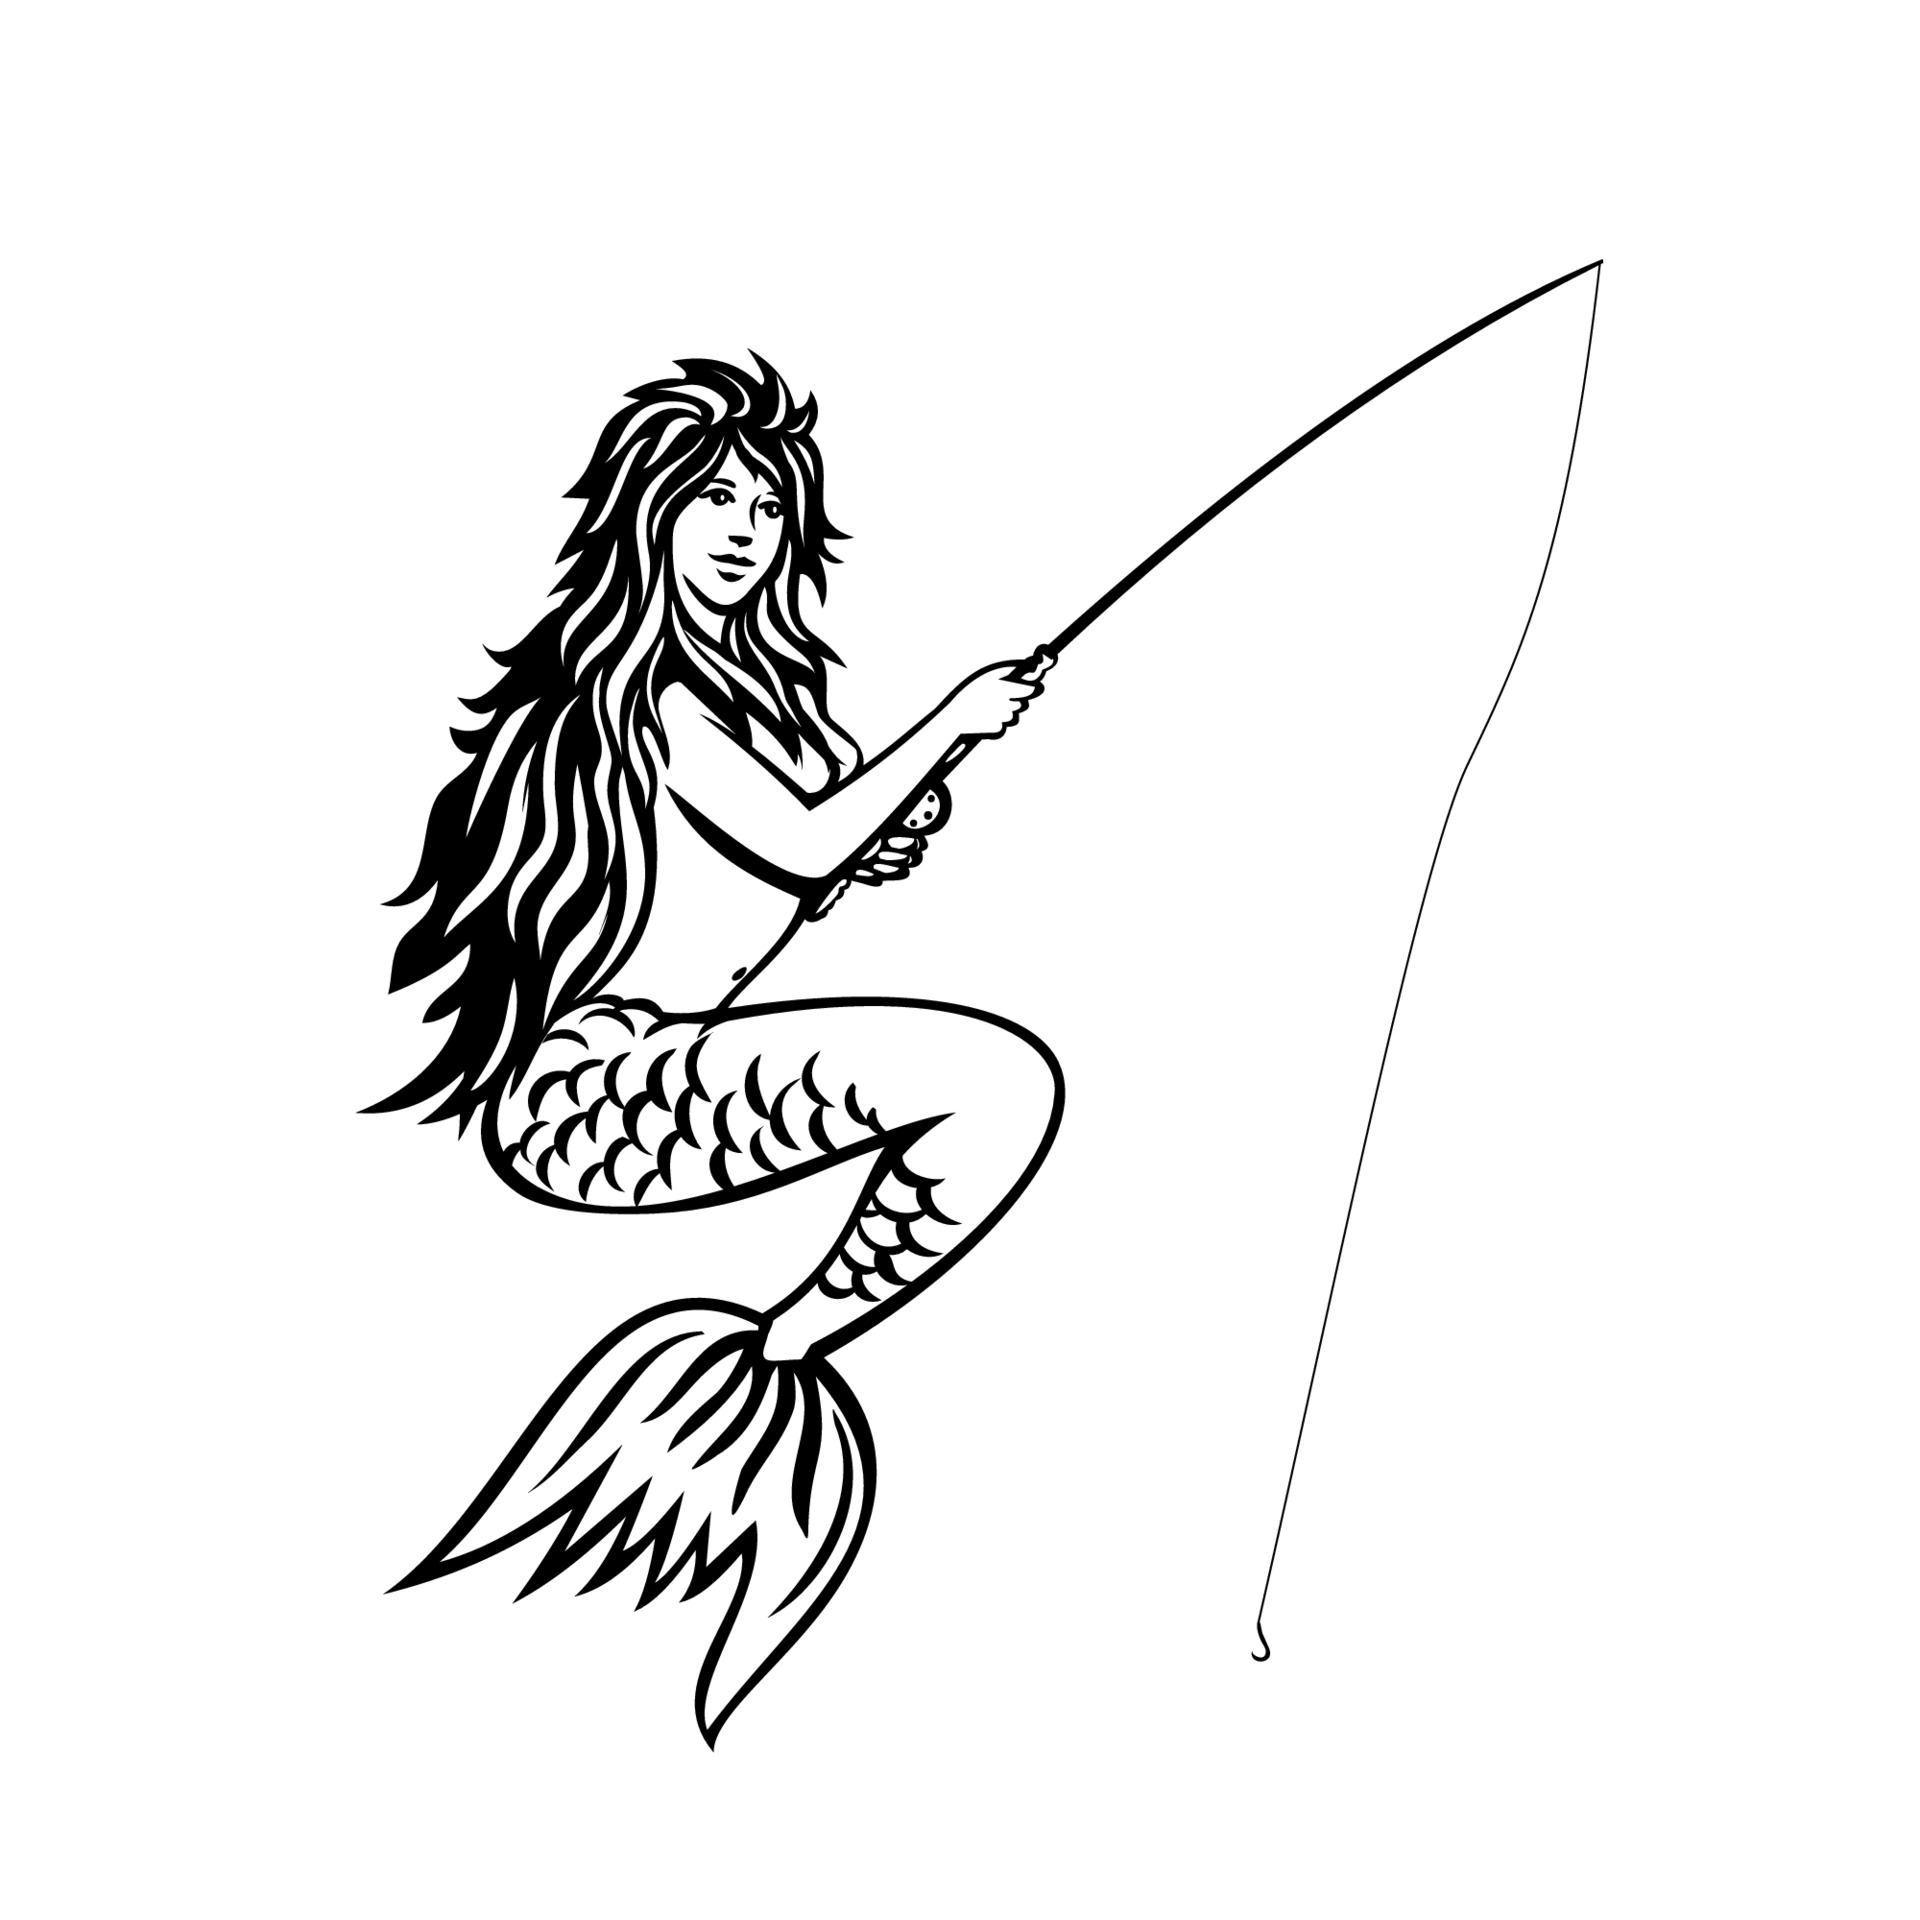 Mermaid or Siren with Fishing Rod and Reel Fly Fishing Mascot